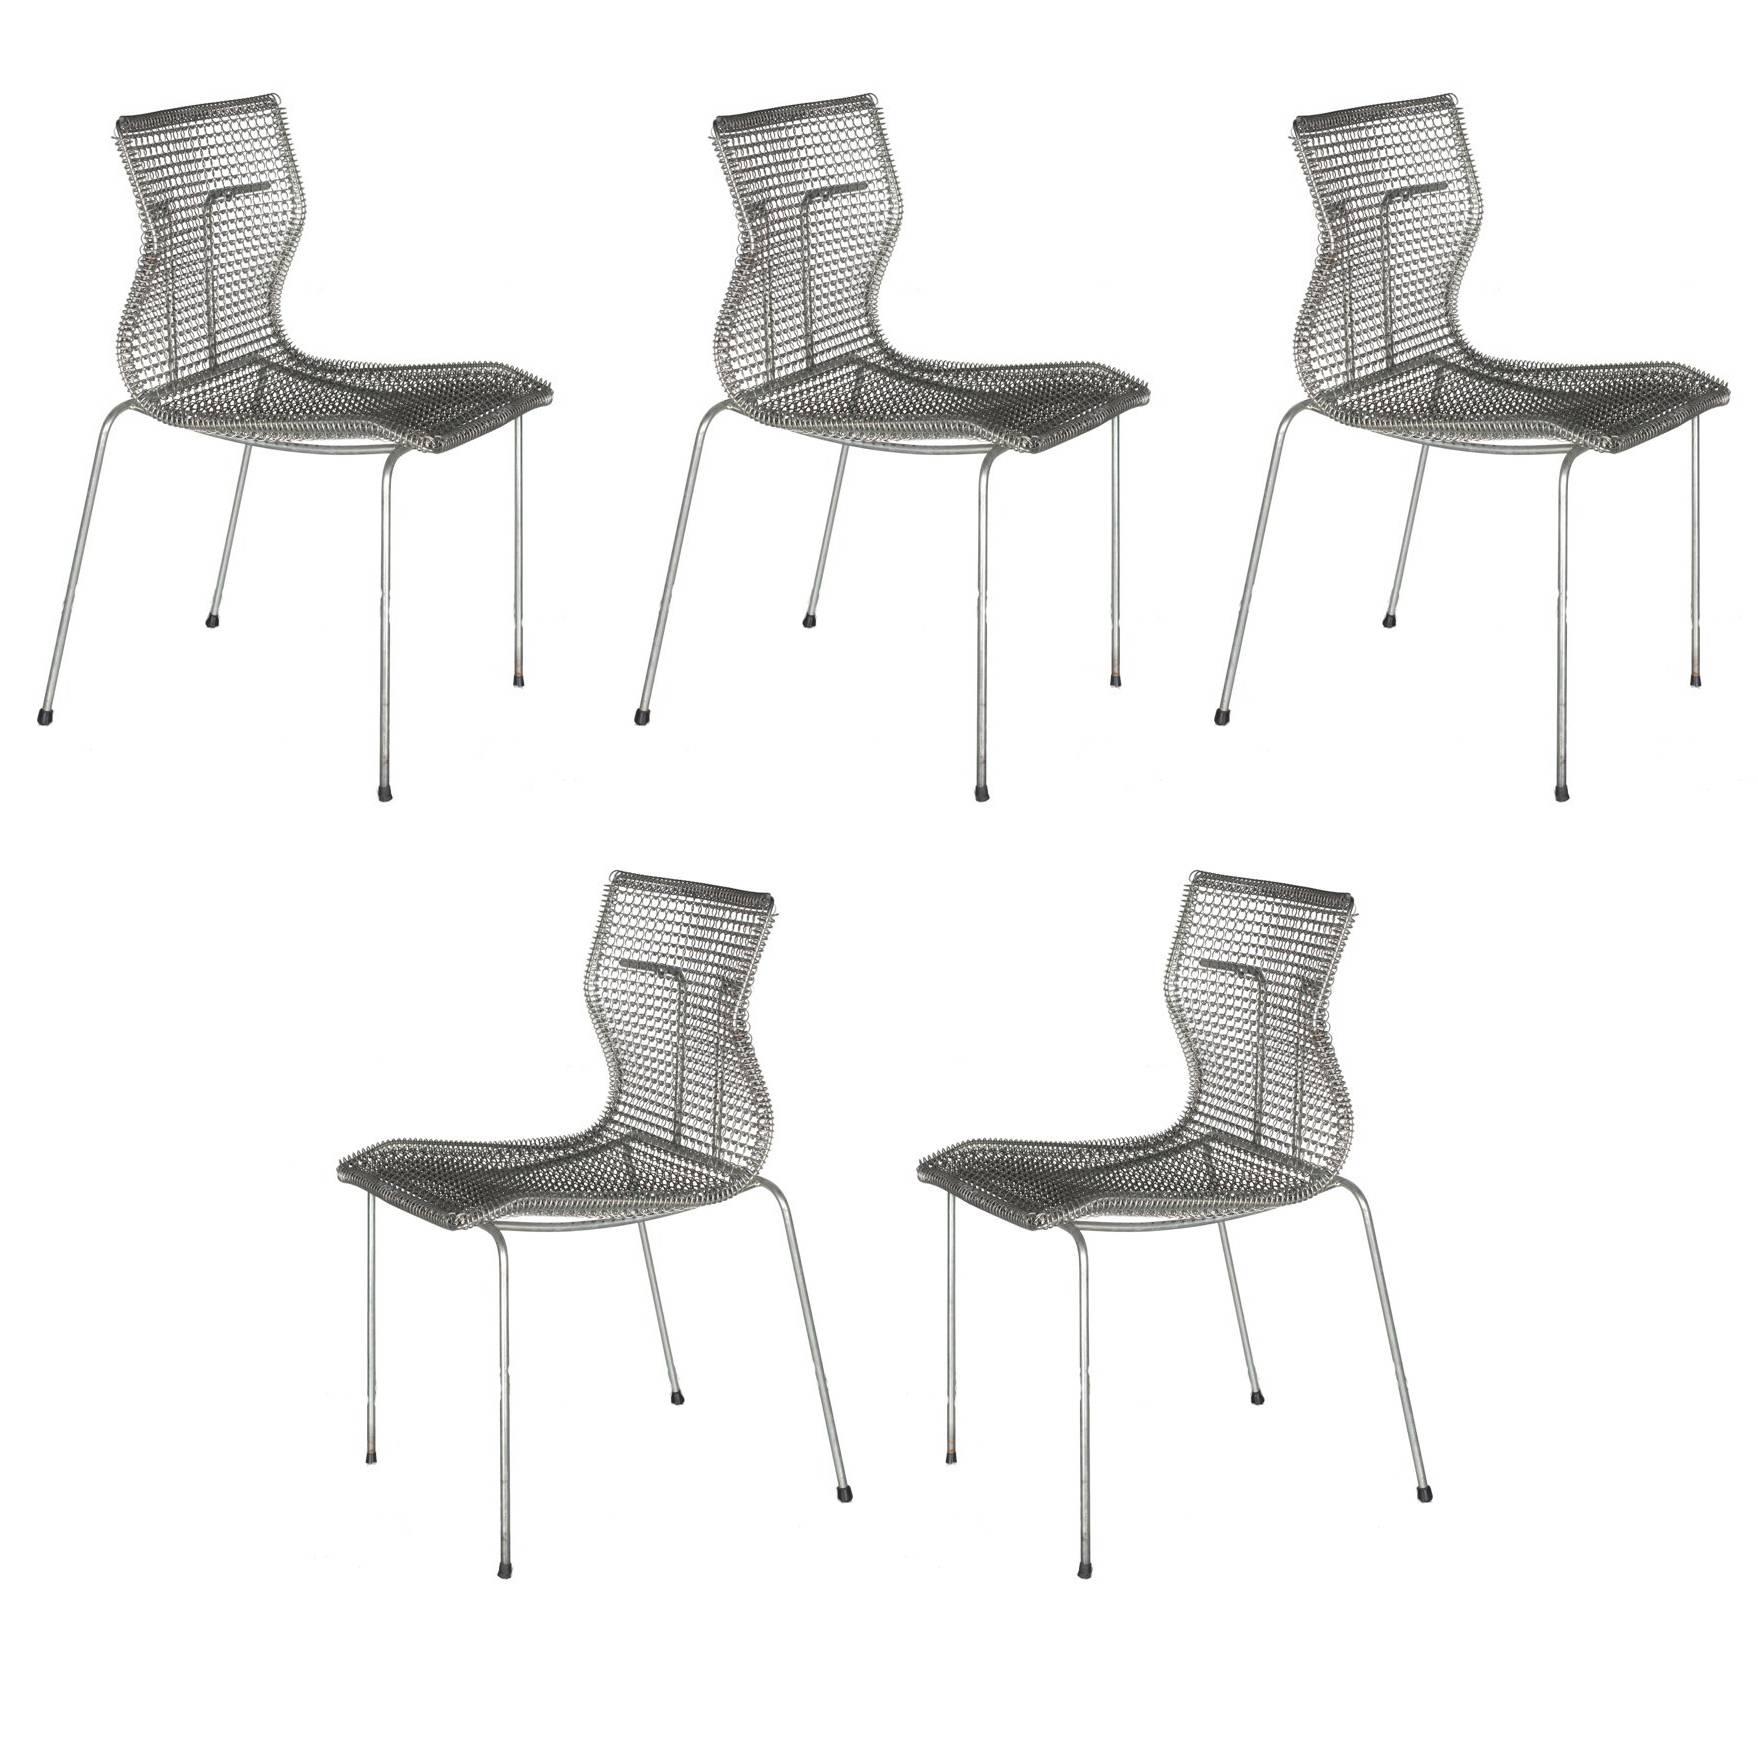 Niall O'Flynn 't Spectrum 3 Rascal Chairs 1997 Galvanized Metal For Sale